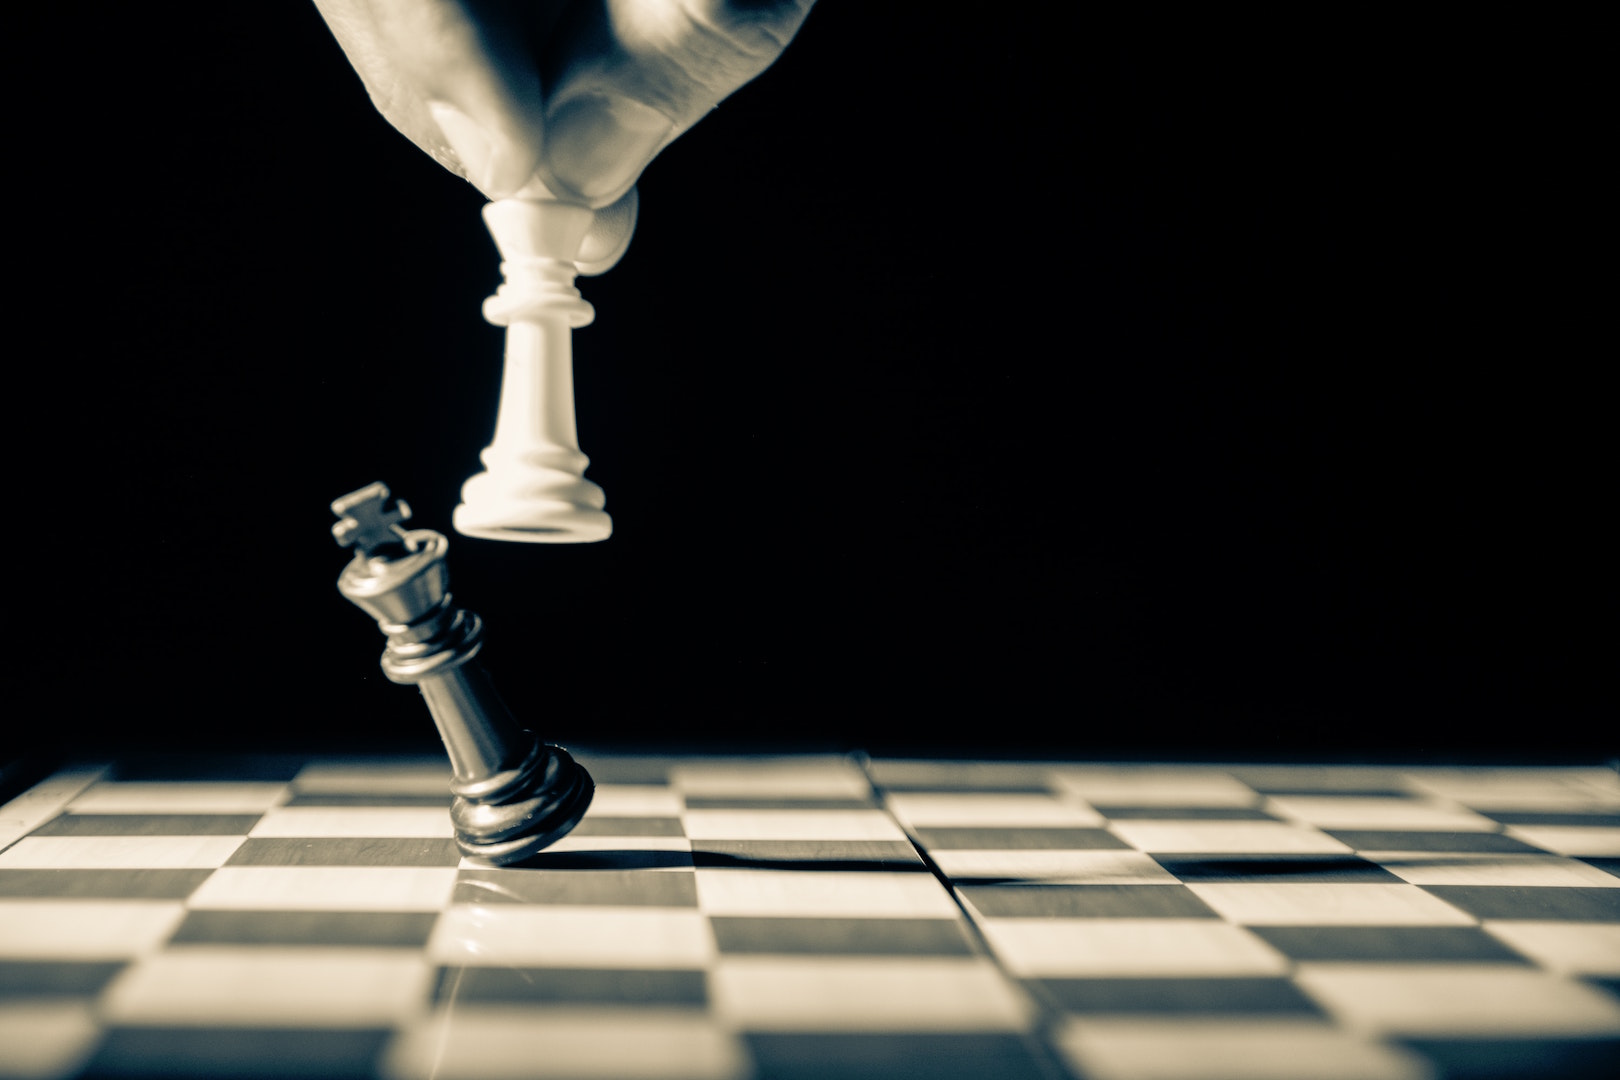 What we can learn from chess